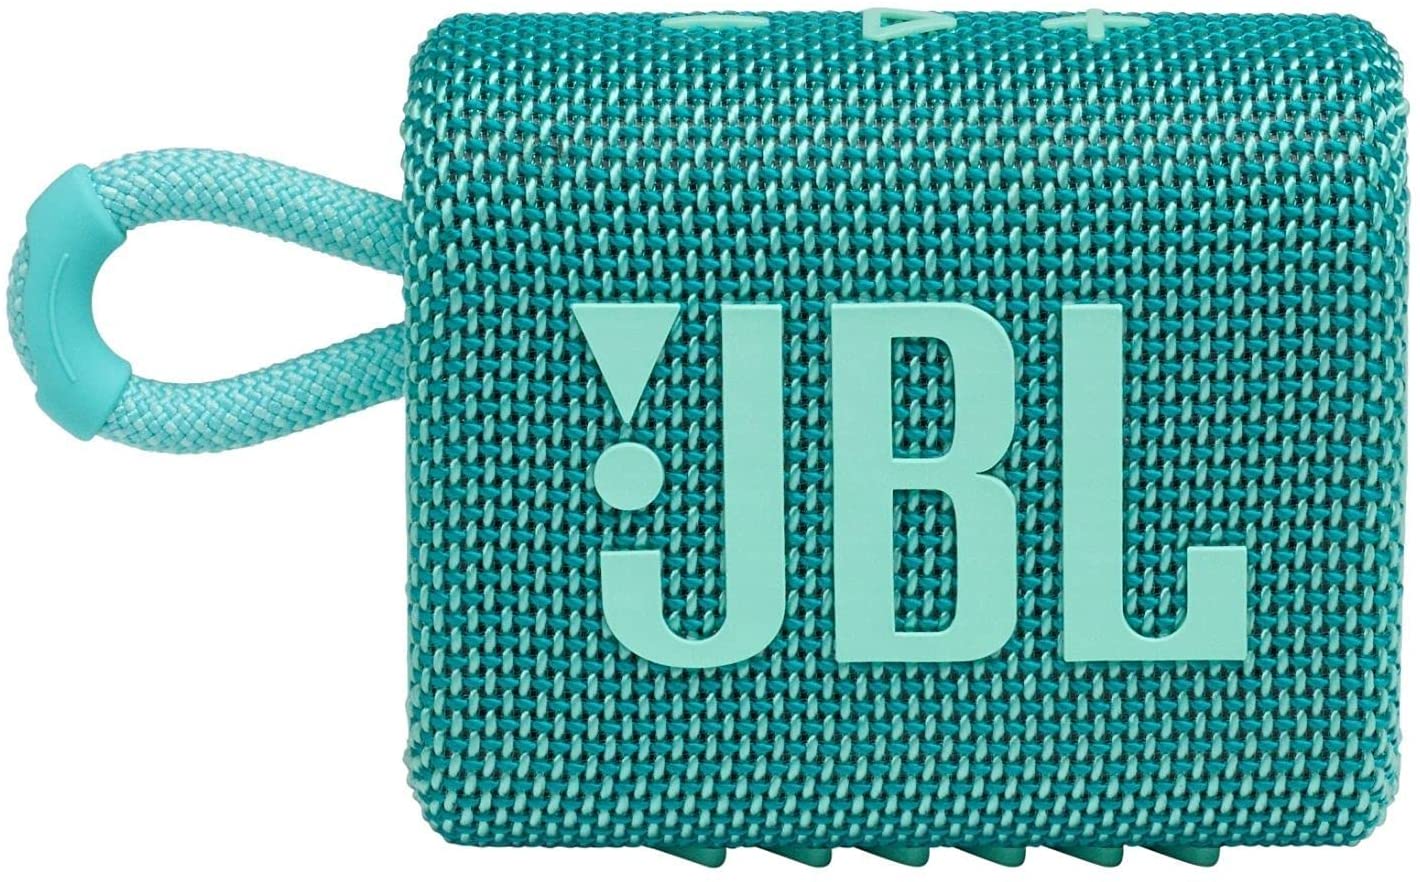 ''JBL Go 3: Portable Speaker with Bluetooth, Builtin BATTERY, Waterproof and Dustproof Feature Teal J